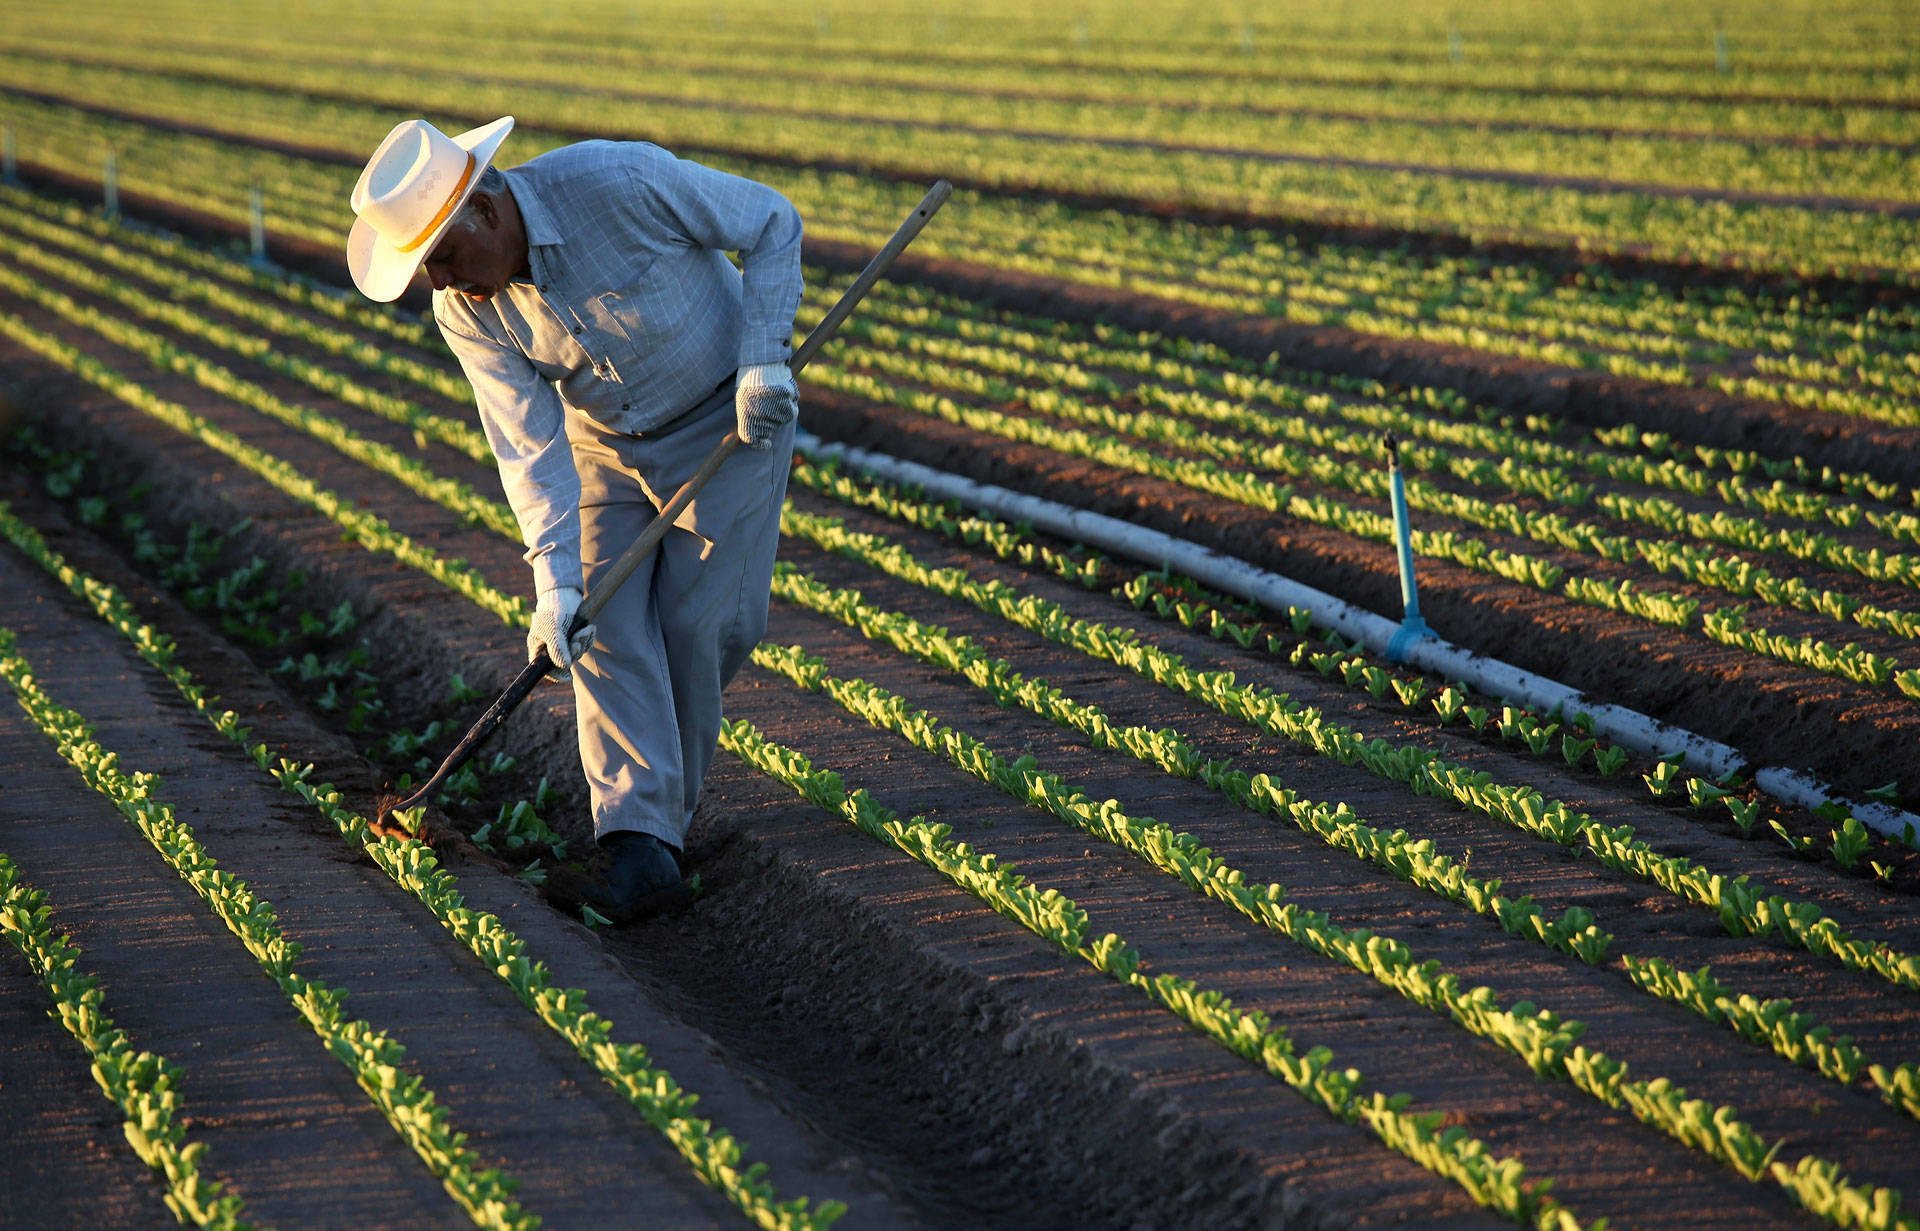 A farmworker cultivates lettuce in October 2013 in the Imperial County town of Holtville. John Moore/Getty Images